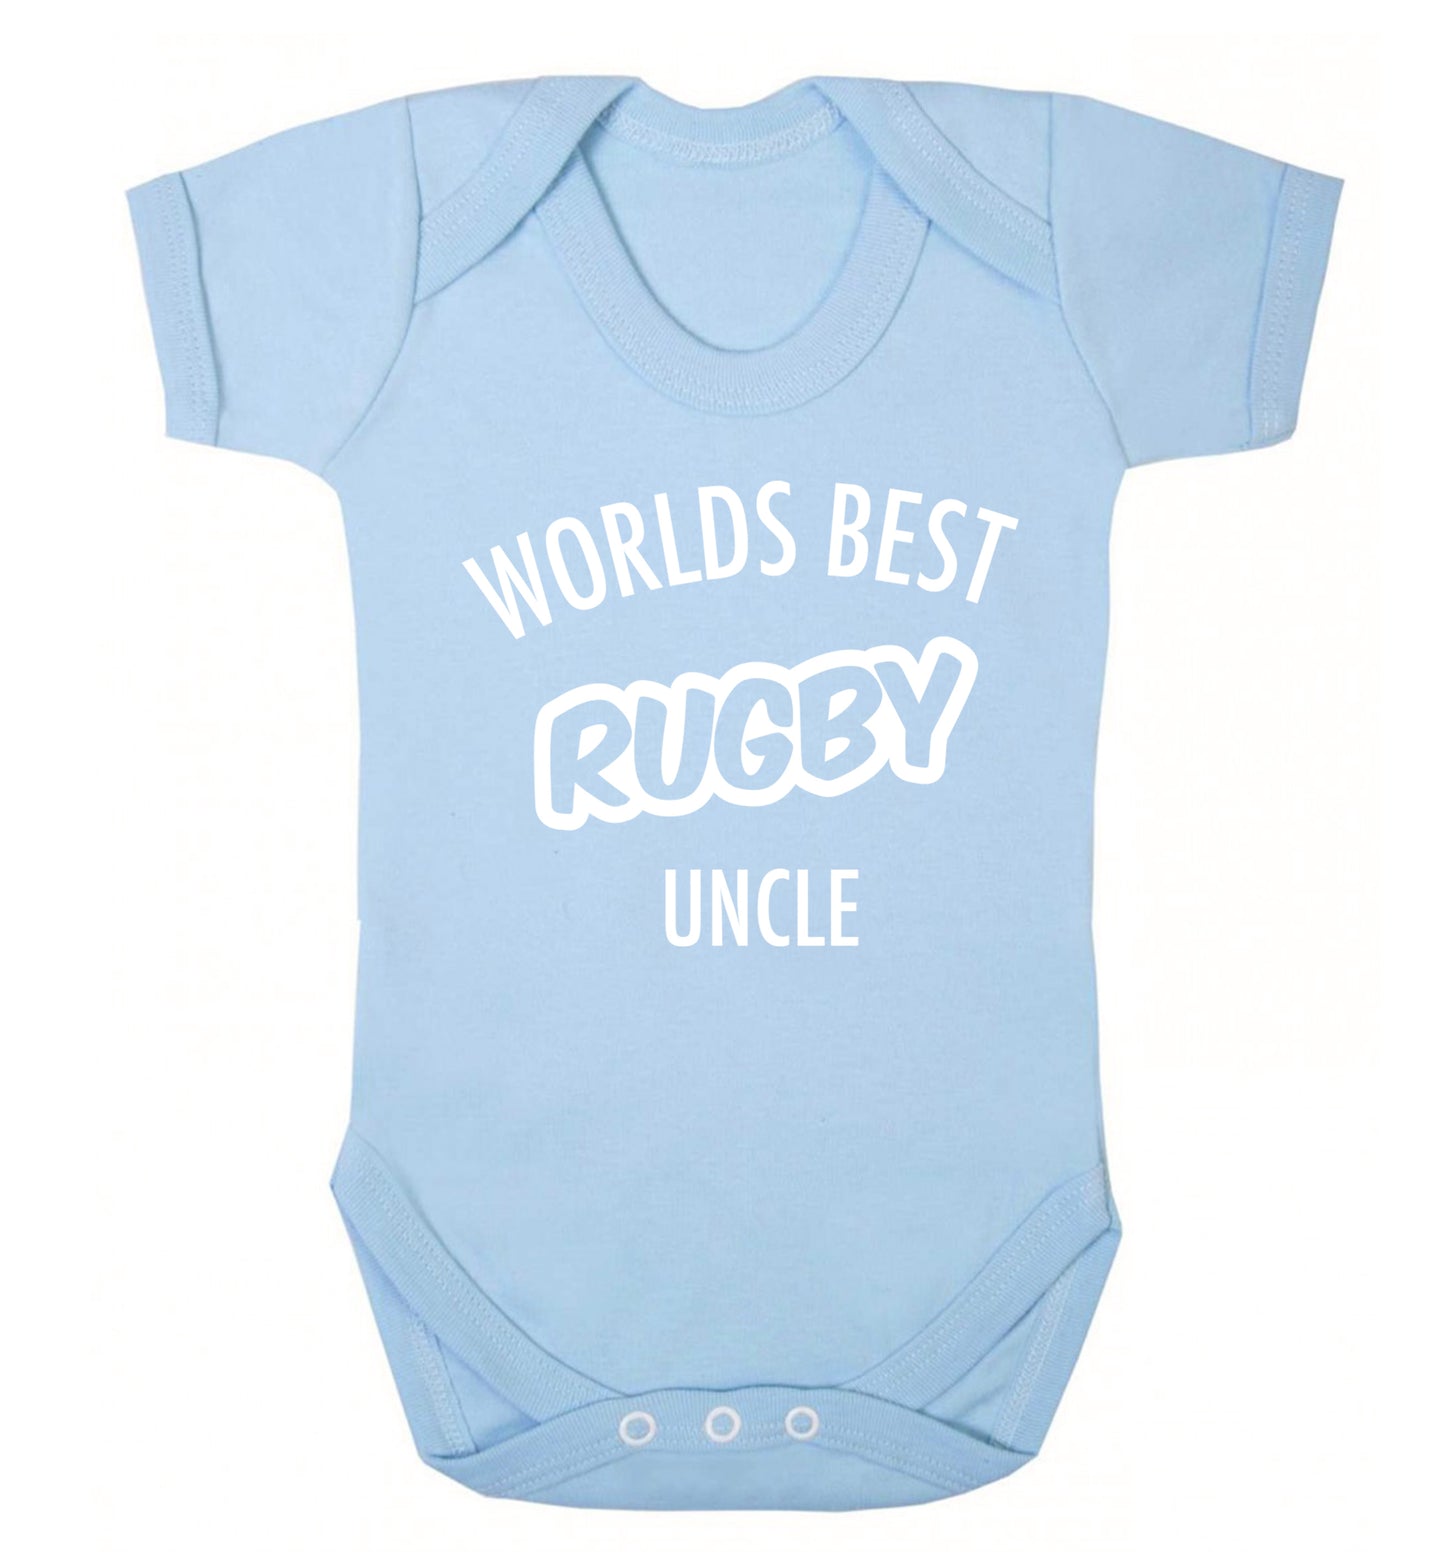 Worlds best rugby uncle Baby Vest pale blue 18-24 months